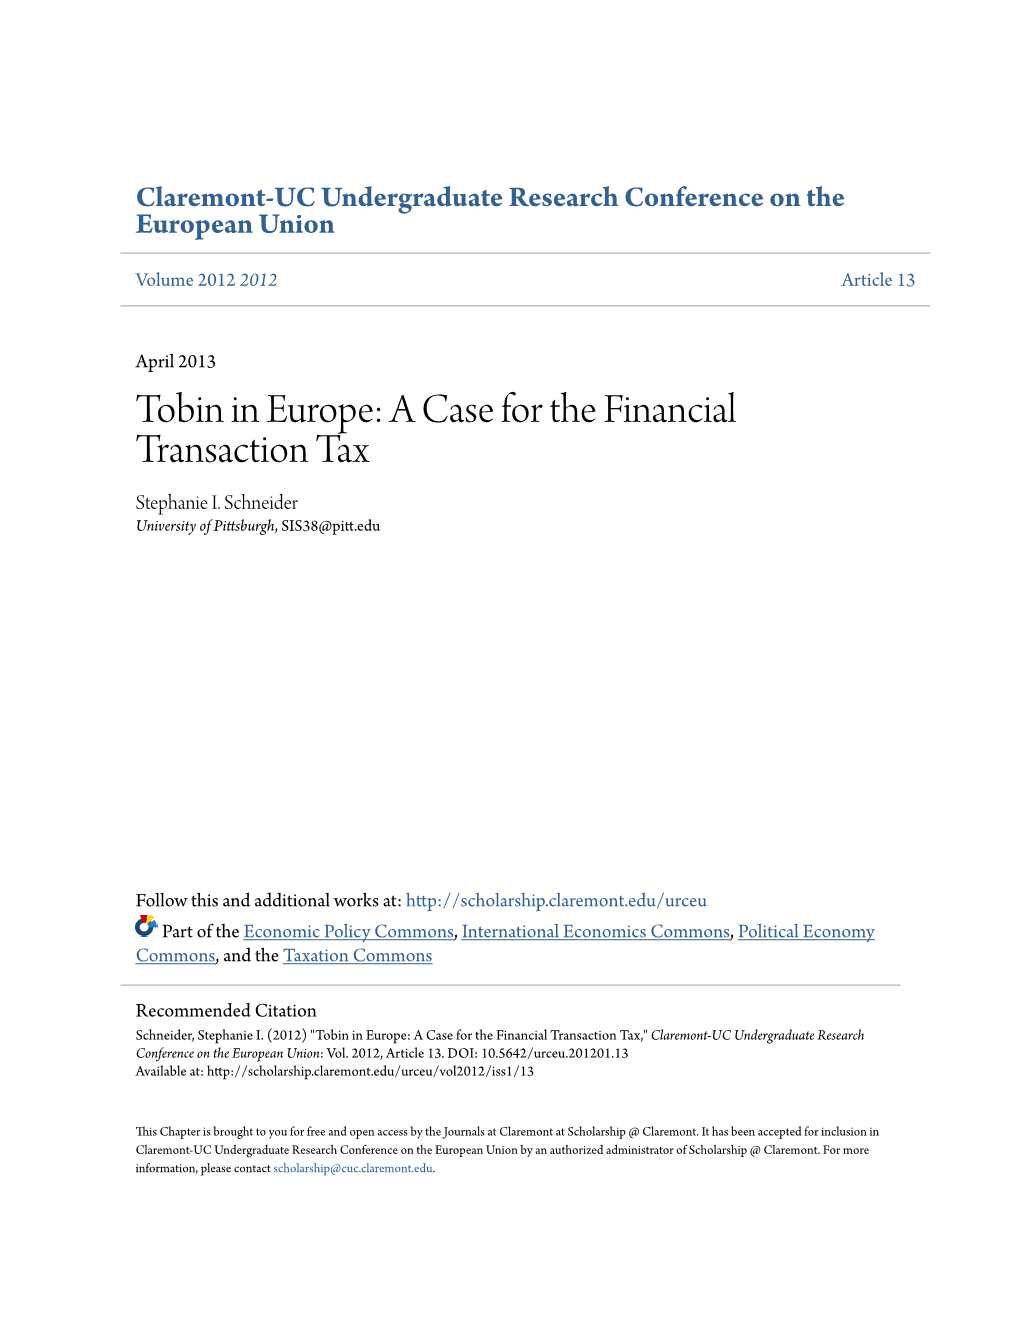 A Case for the Financial Transaction Tax Stephanie I